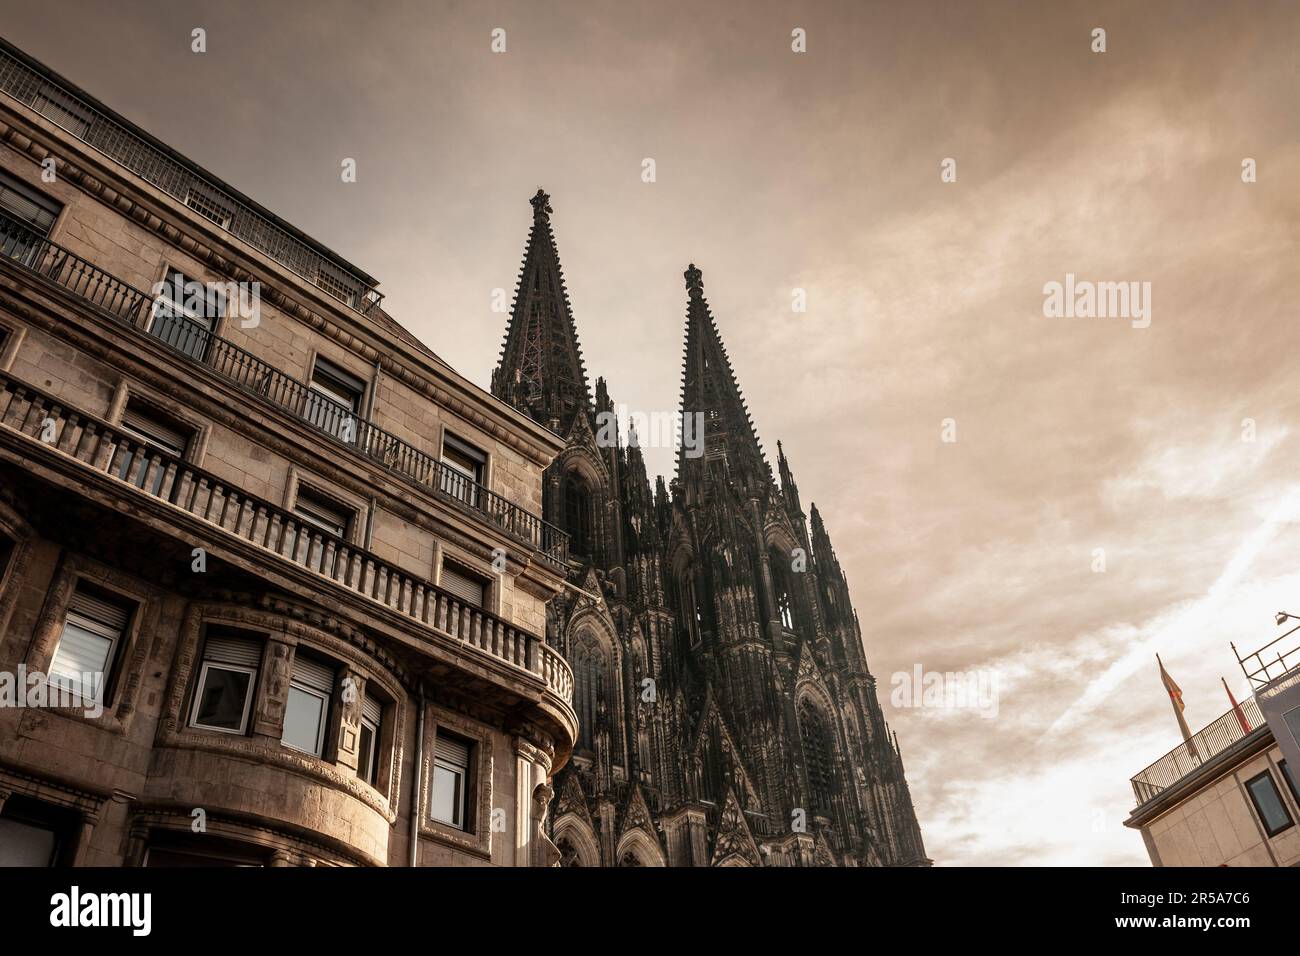 Picture of the cologne cathedral seen from below during the afternoon. Cologne Cathedral is a Catholic cathedral in Cologne, North Rhine-Westphalia. I Stock Photo